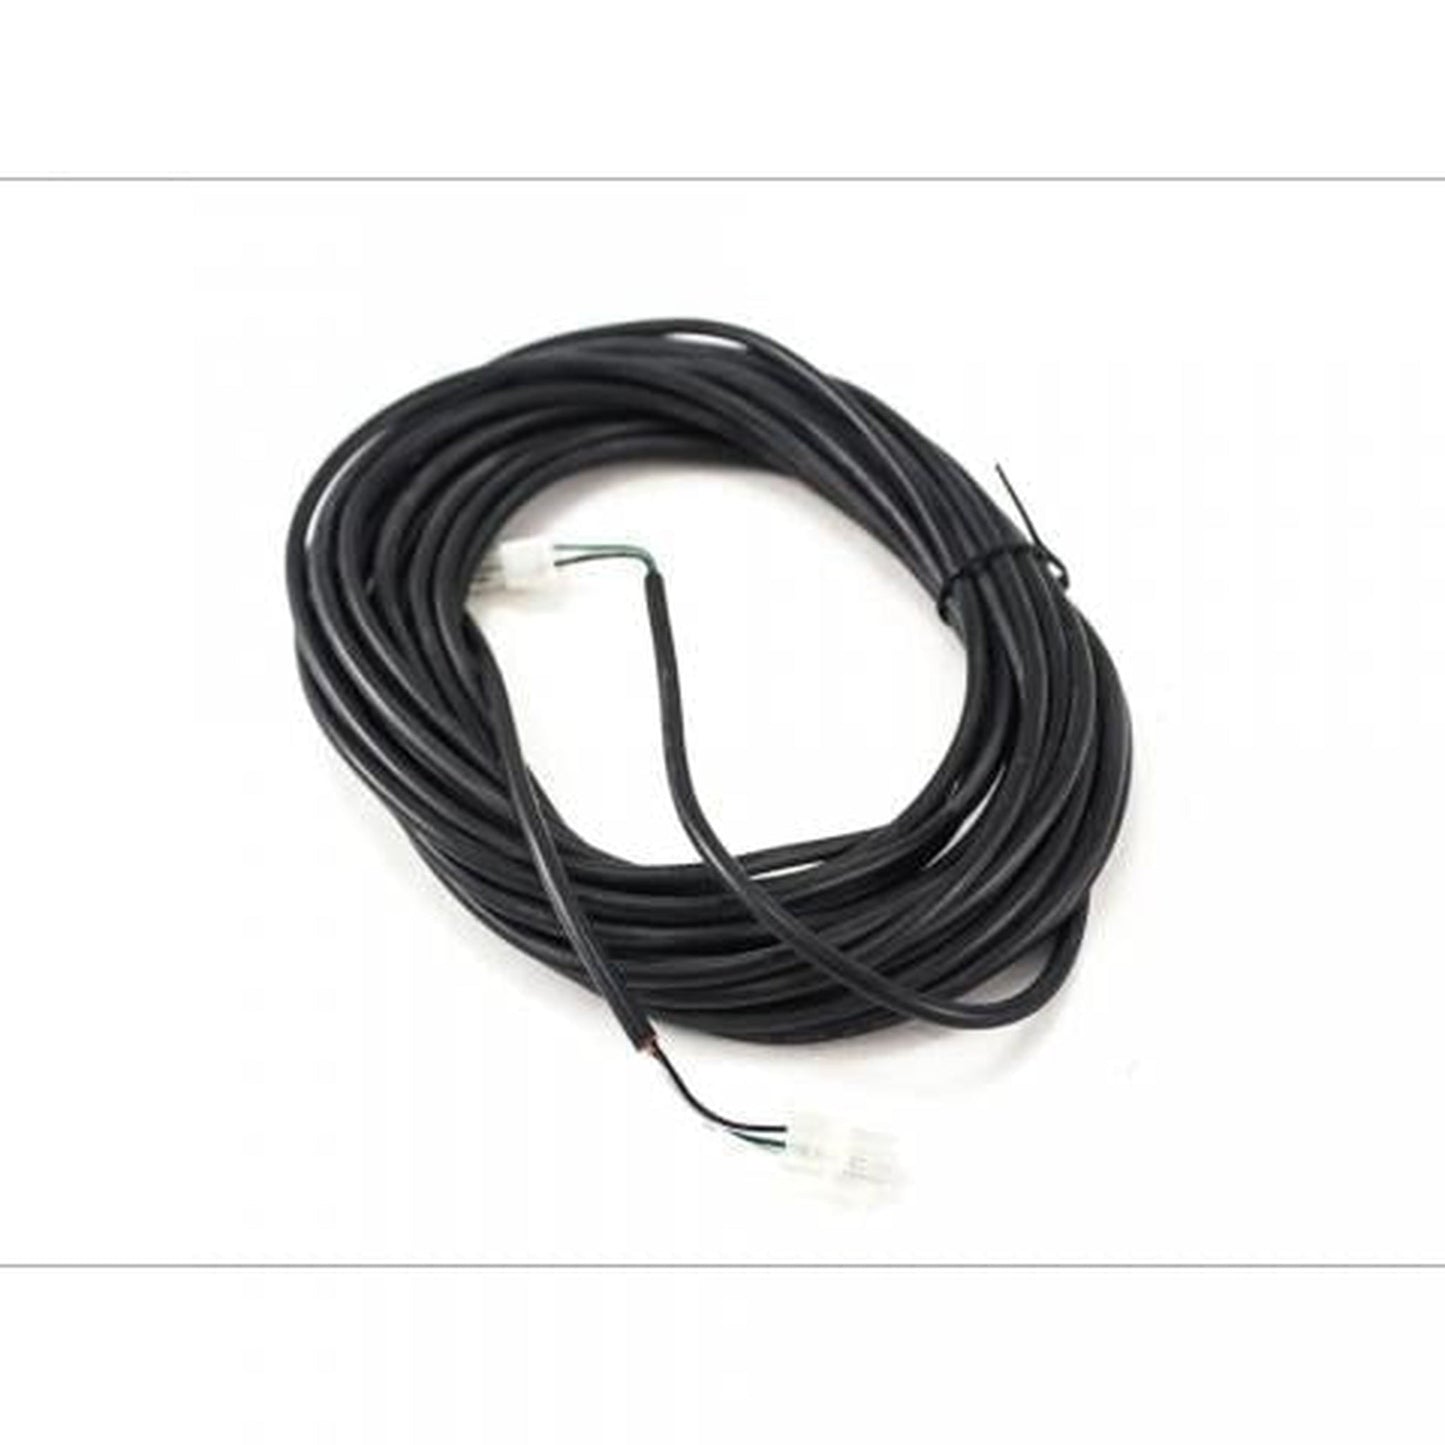 MrSteam eTEMPO Start 60-Ft Cable